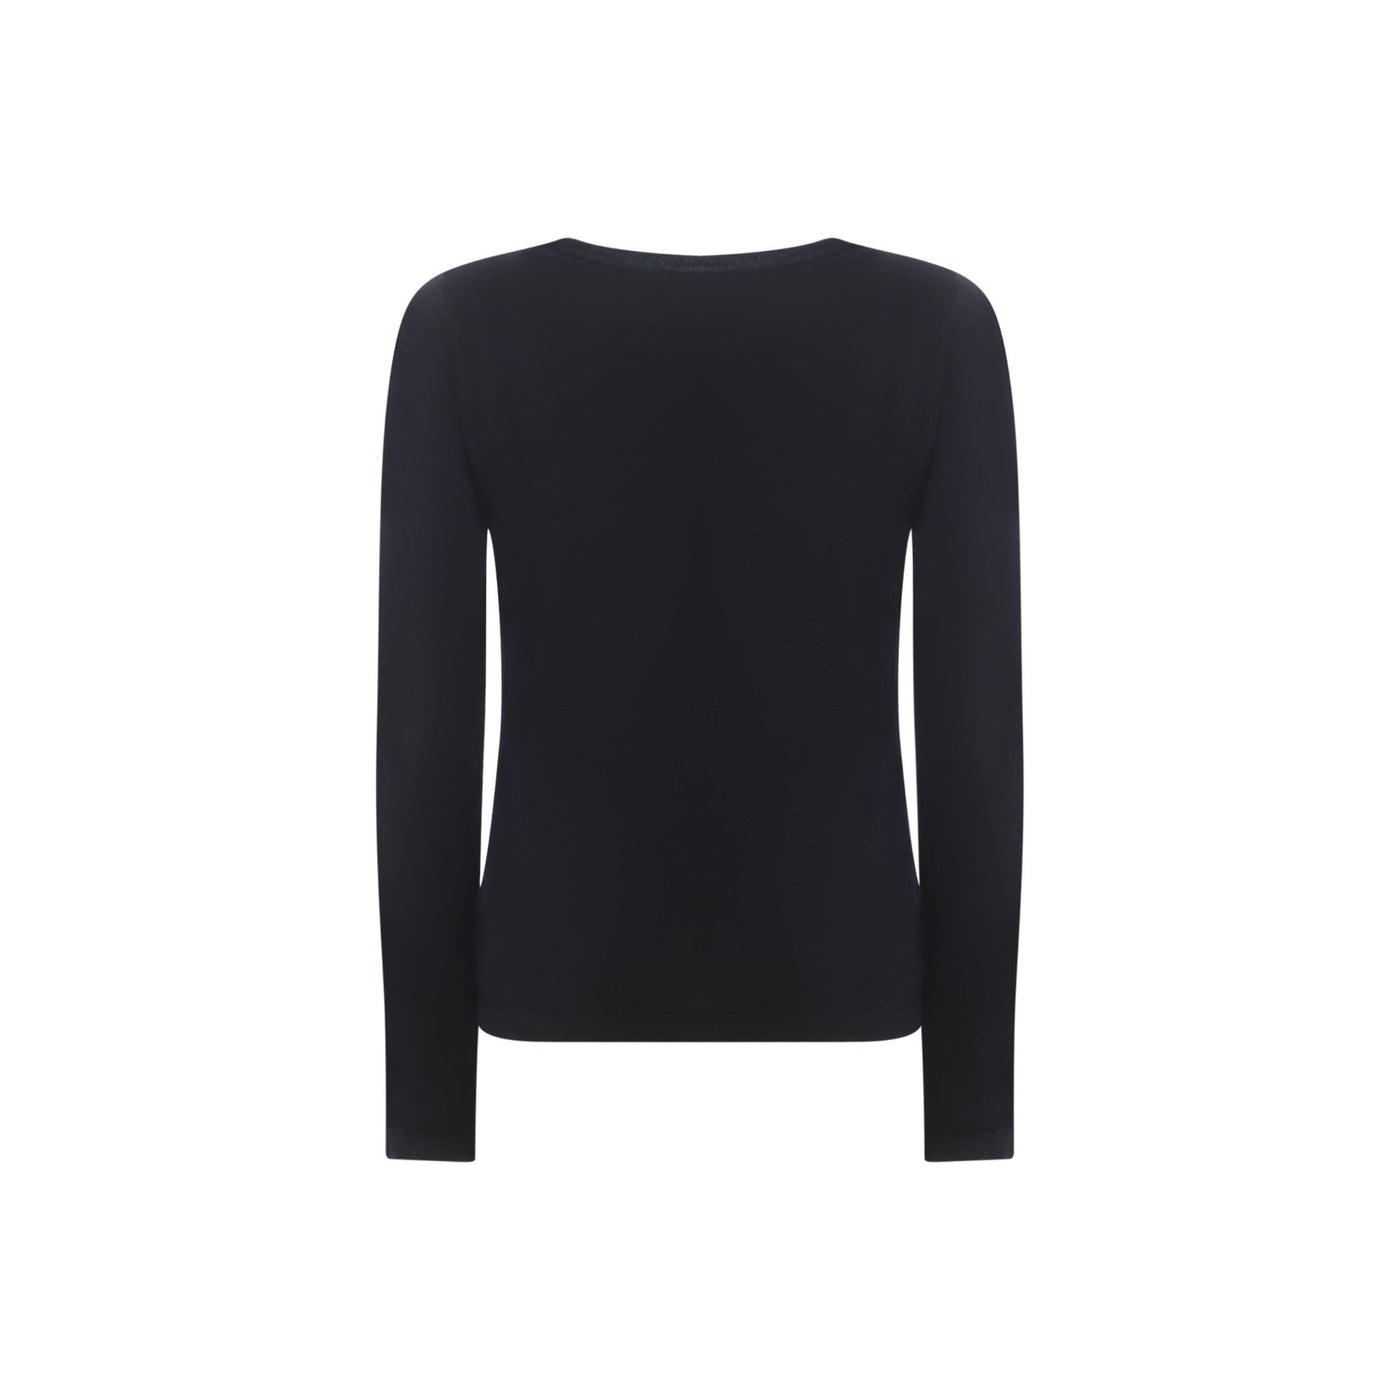 Women's sweater with straight line